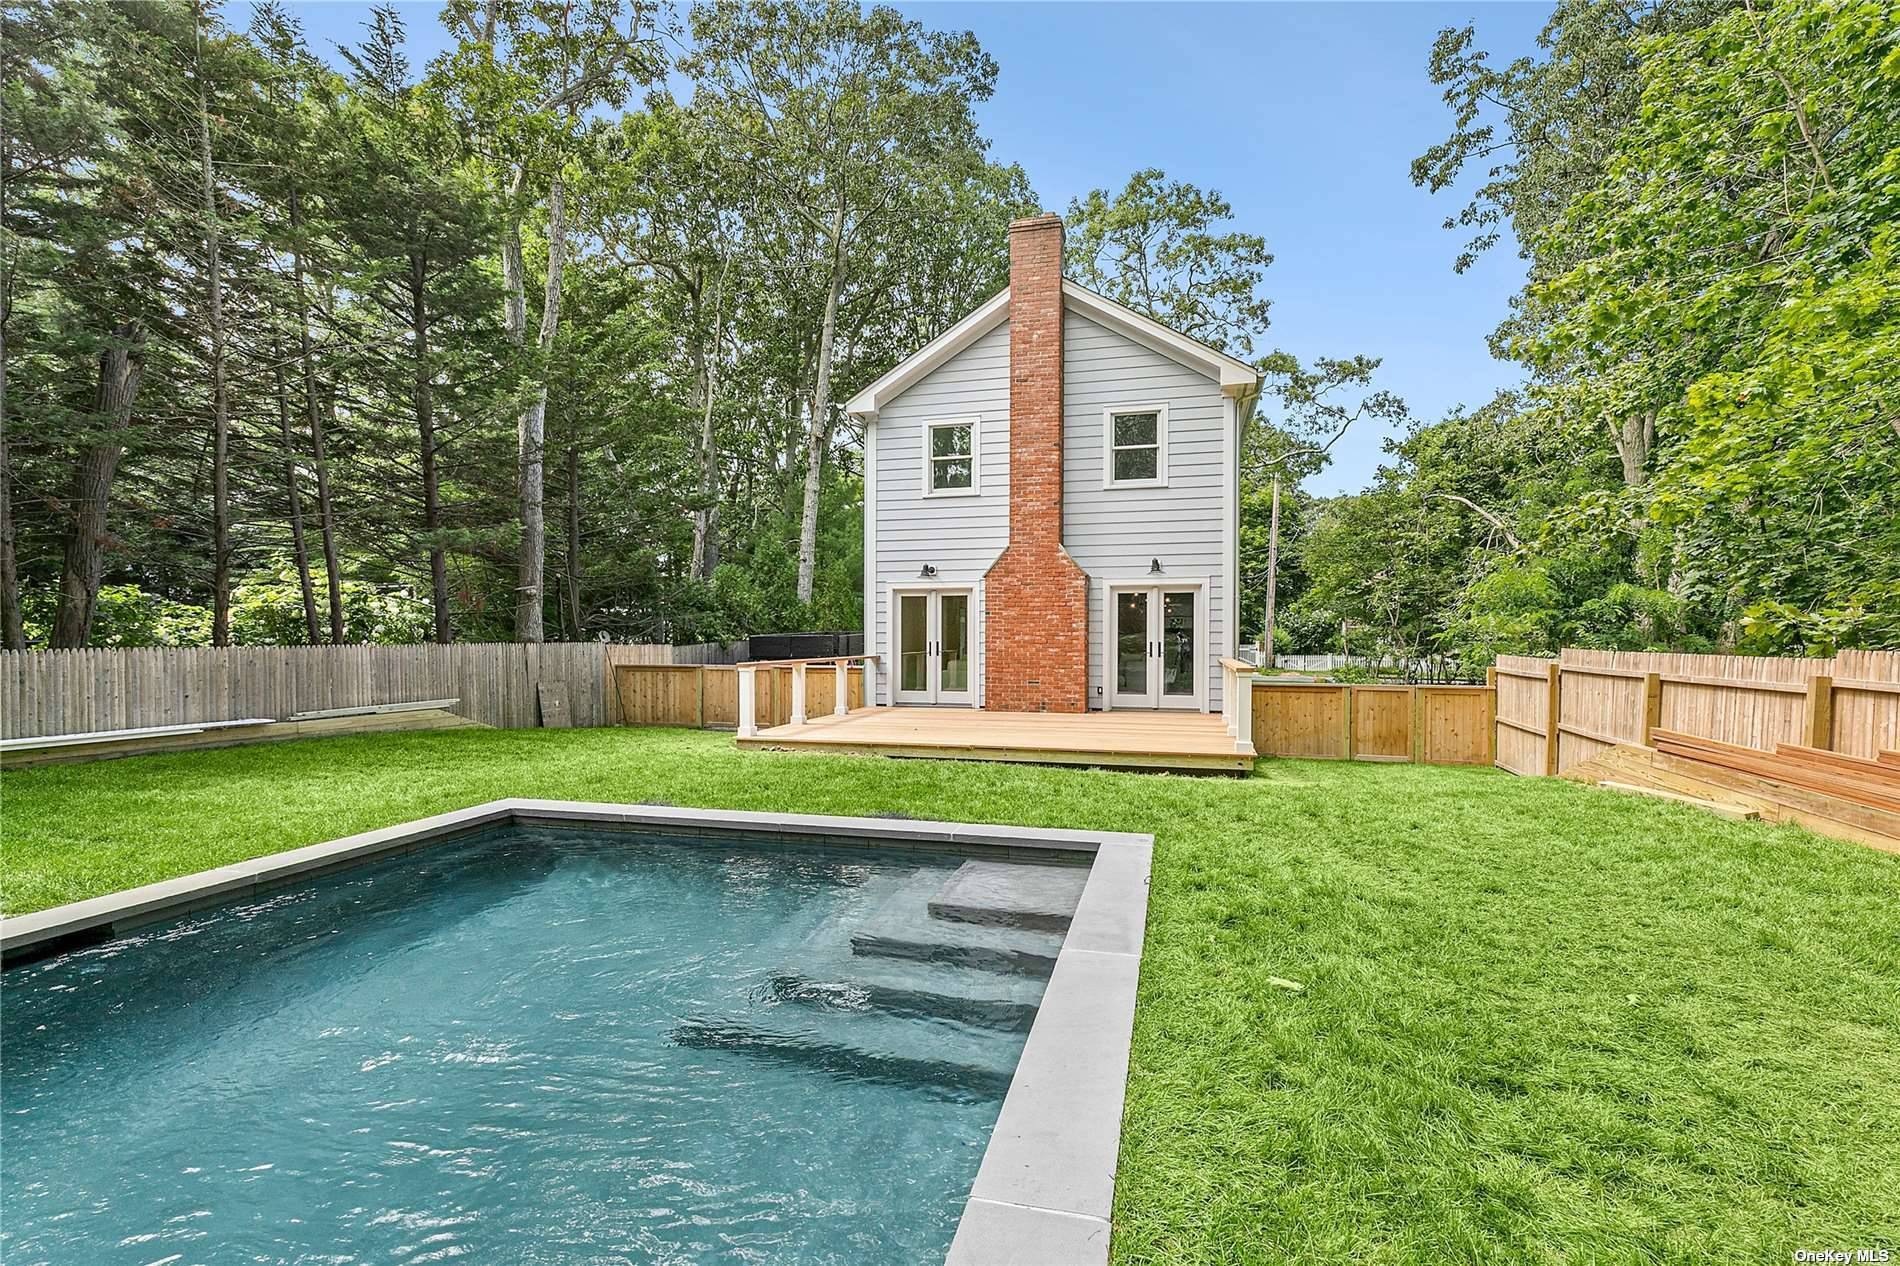 Set on a quiet village street just minutes from the world class shops, restaurants and waterfronts of Sag Harbor lies this newly renovated 4 bedroom, 3.